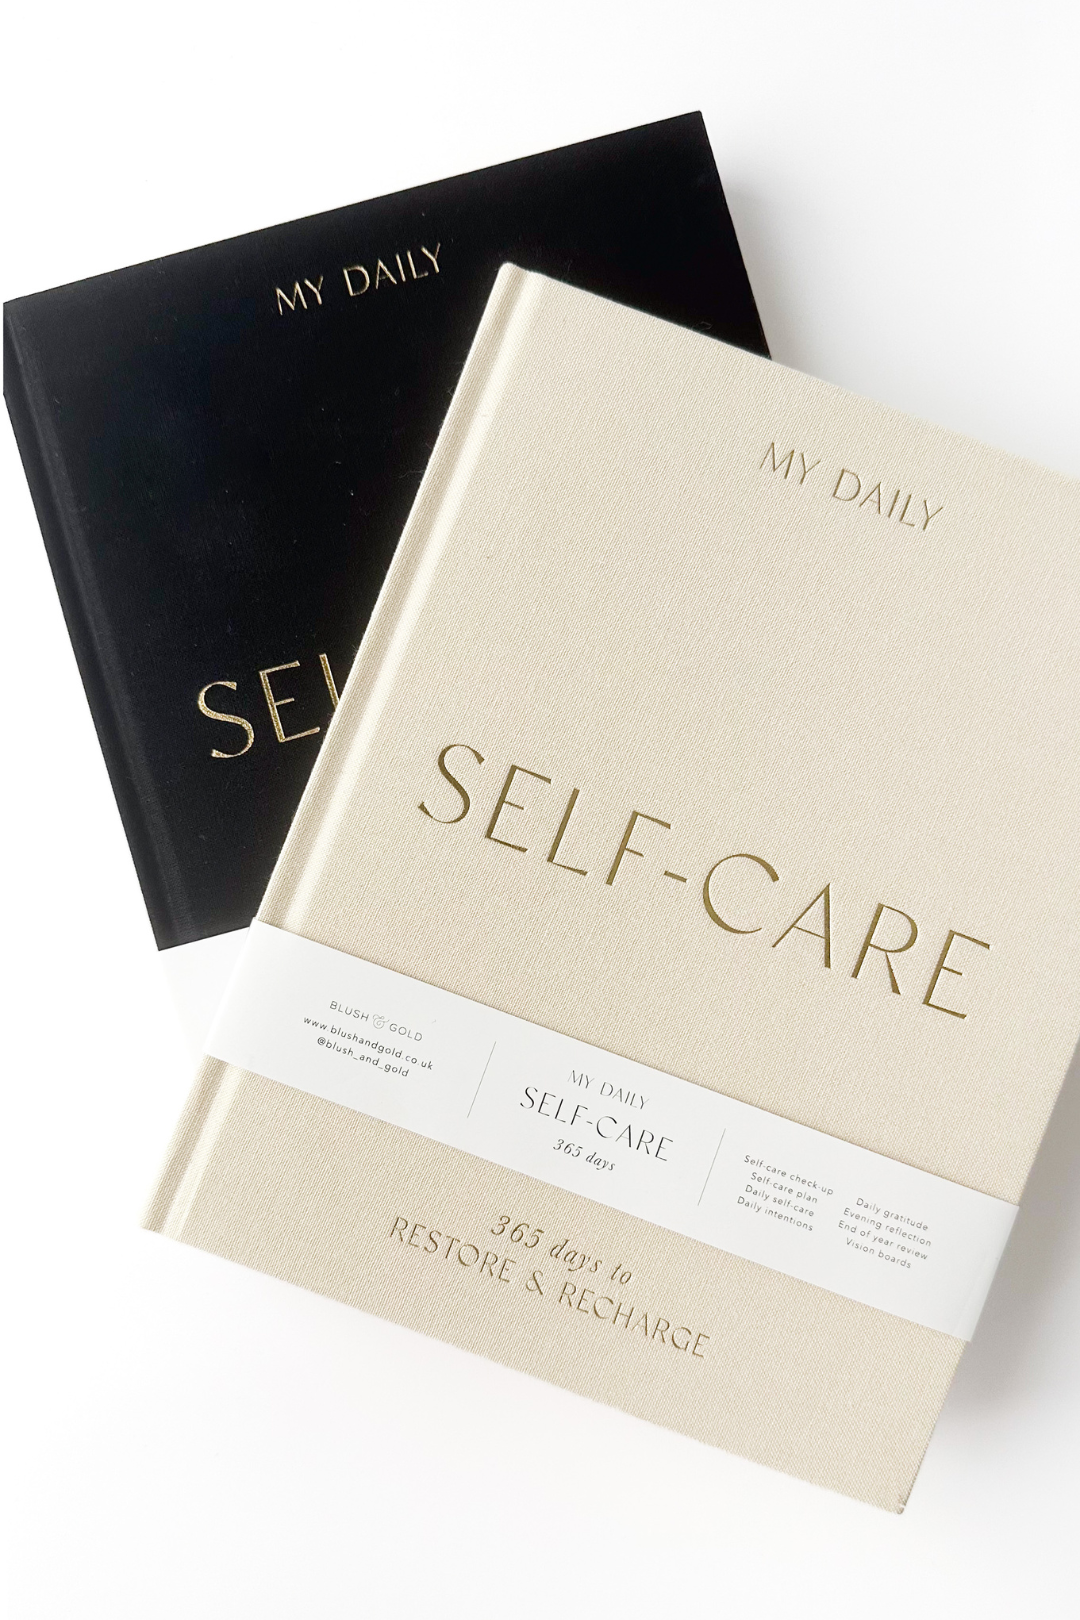 Self-care reflection journal featuring prompts for daily reflection and self-awareness, helping you nurture well-being and personal growth. This journal is sold at Blackbird Designs and made by Blush and Gold Journals.